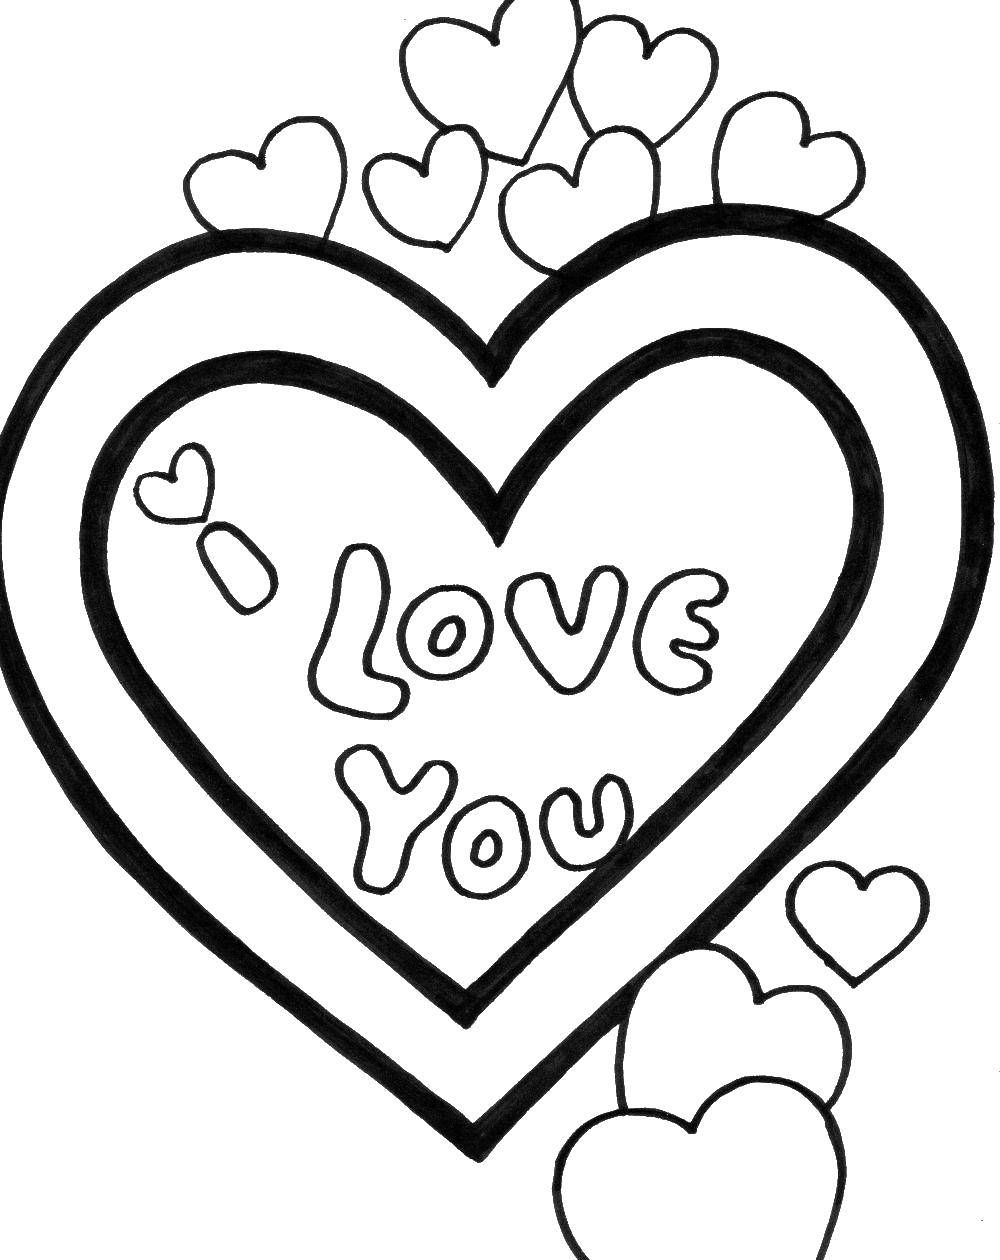 Coloring The phrase I love you in heart. Category I love you. Tags:  I love you, sweetheart.